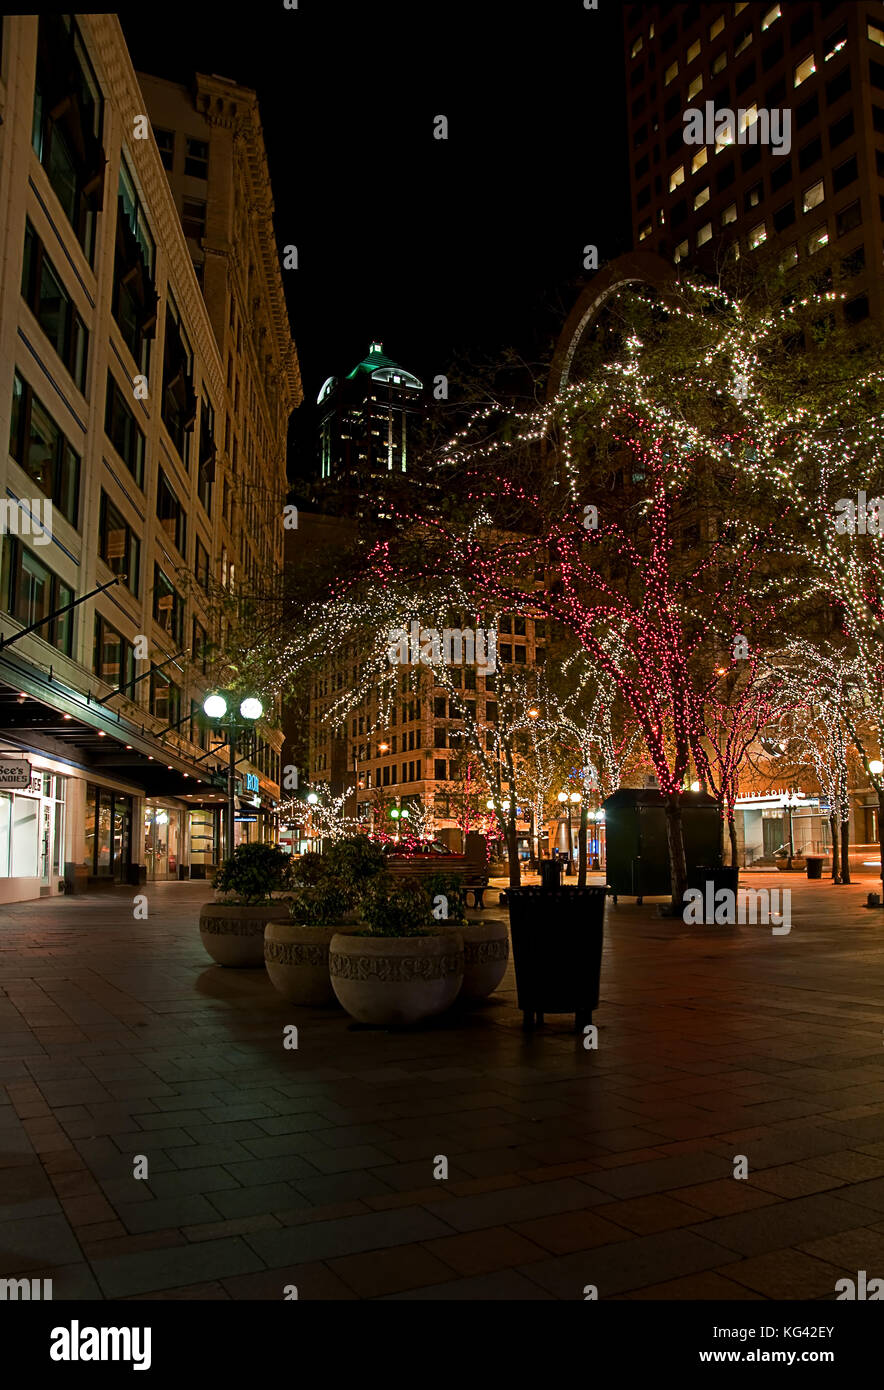 This stock image is of downtown Seattle, WA in King County, at Christmas time with city trees decorated in Christmas lights at light. Stock Photo